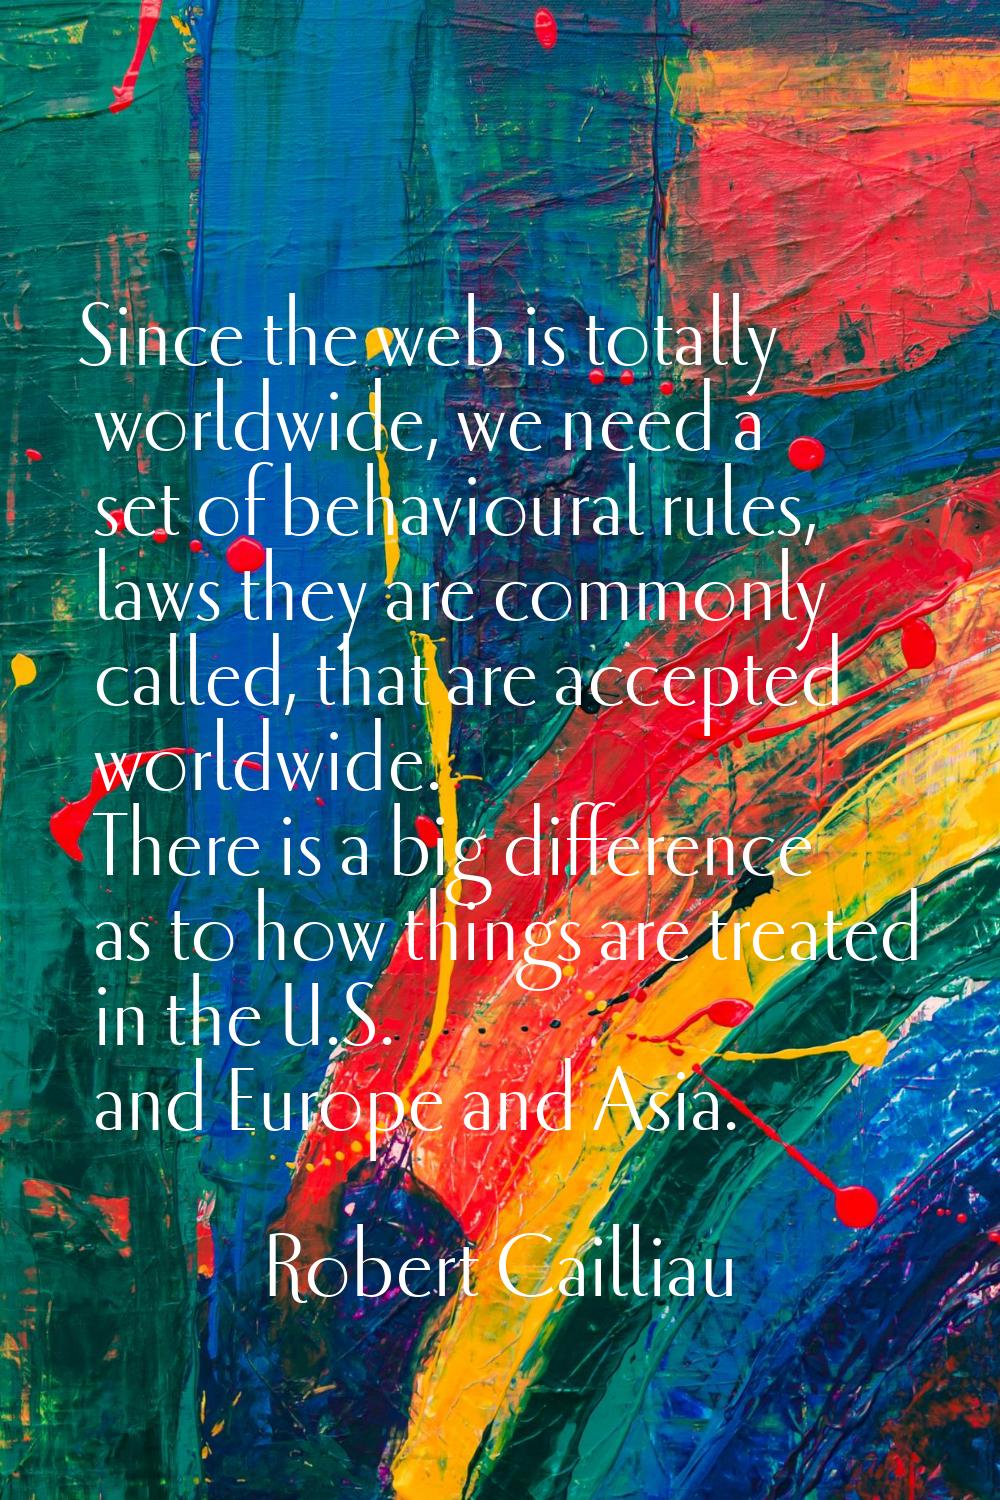 Since the web is totally worldwide, we need a set of behavioural rules, laws they are commonly call